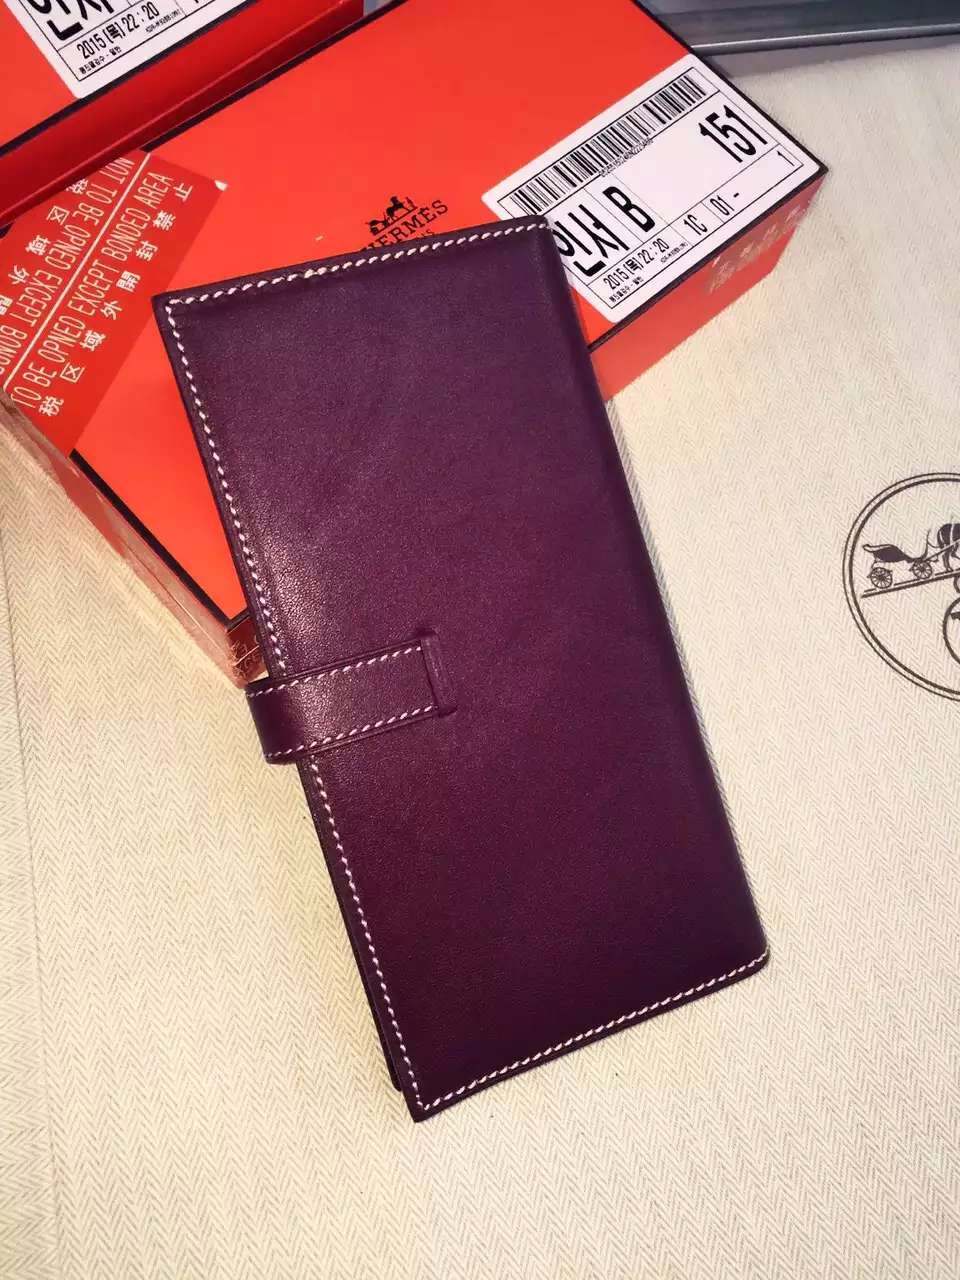 Hand Stitching Hermes Swift Leather Bean Wallet Long Purse in CK57 Bordeaux 19CM